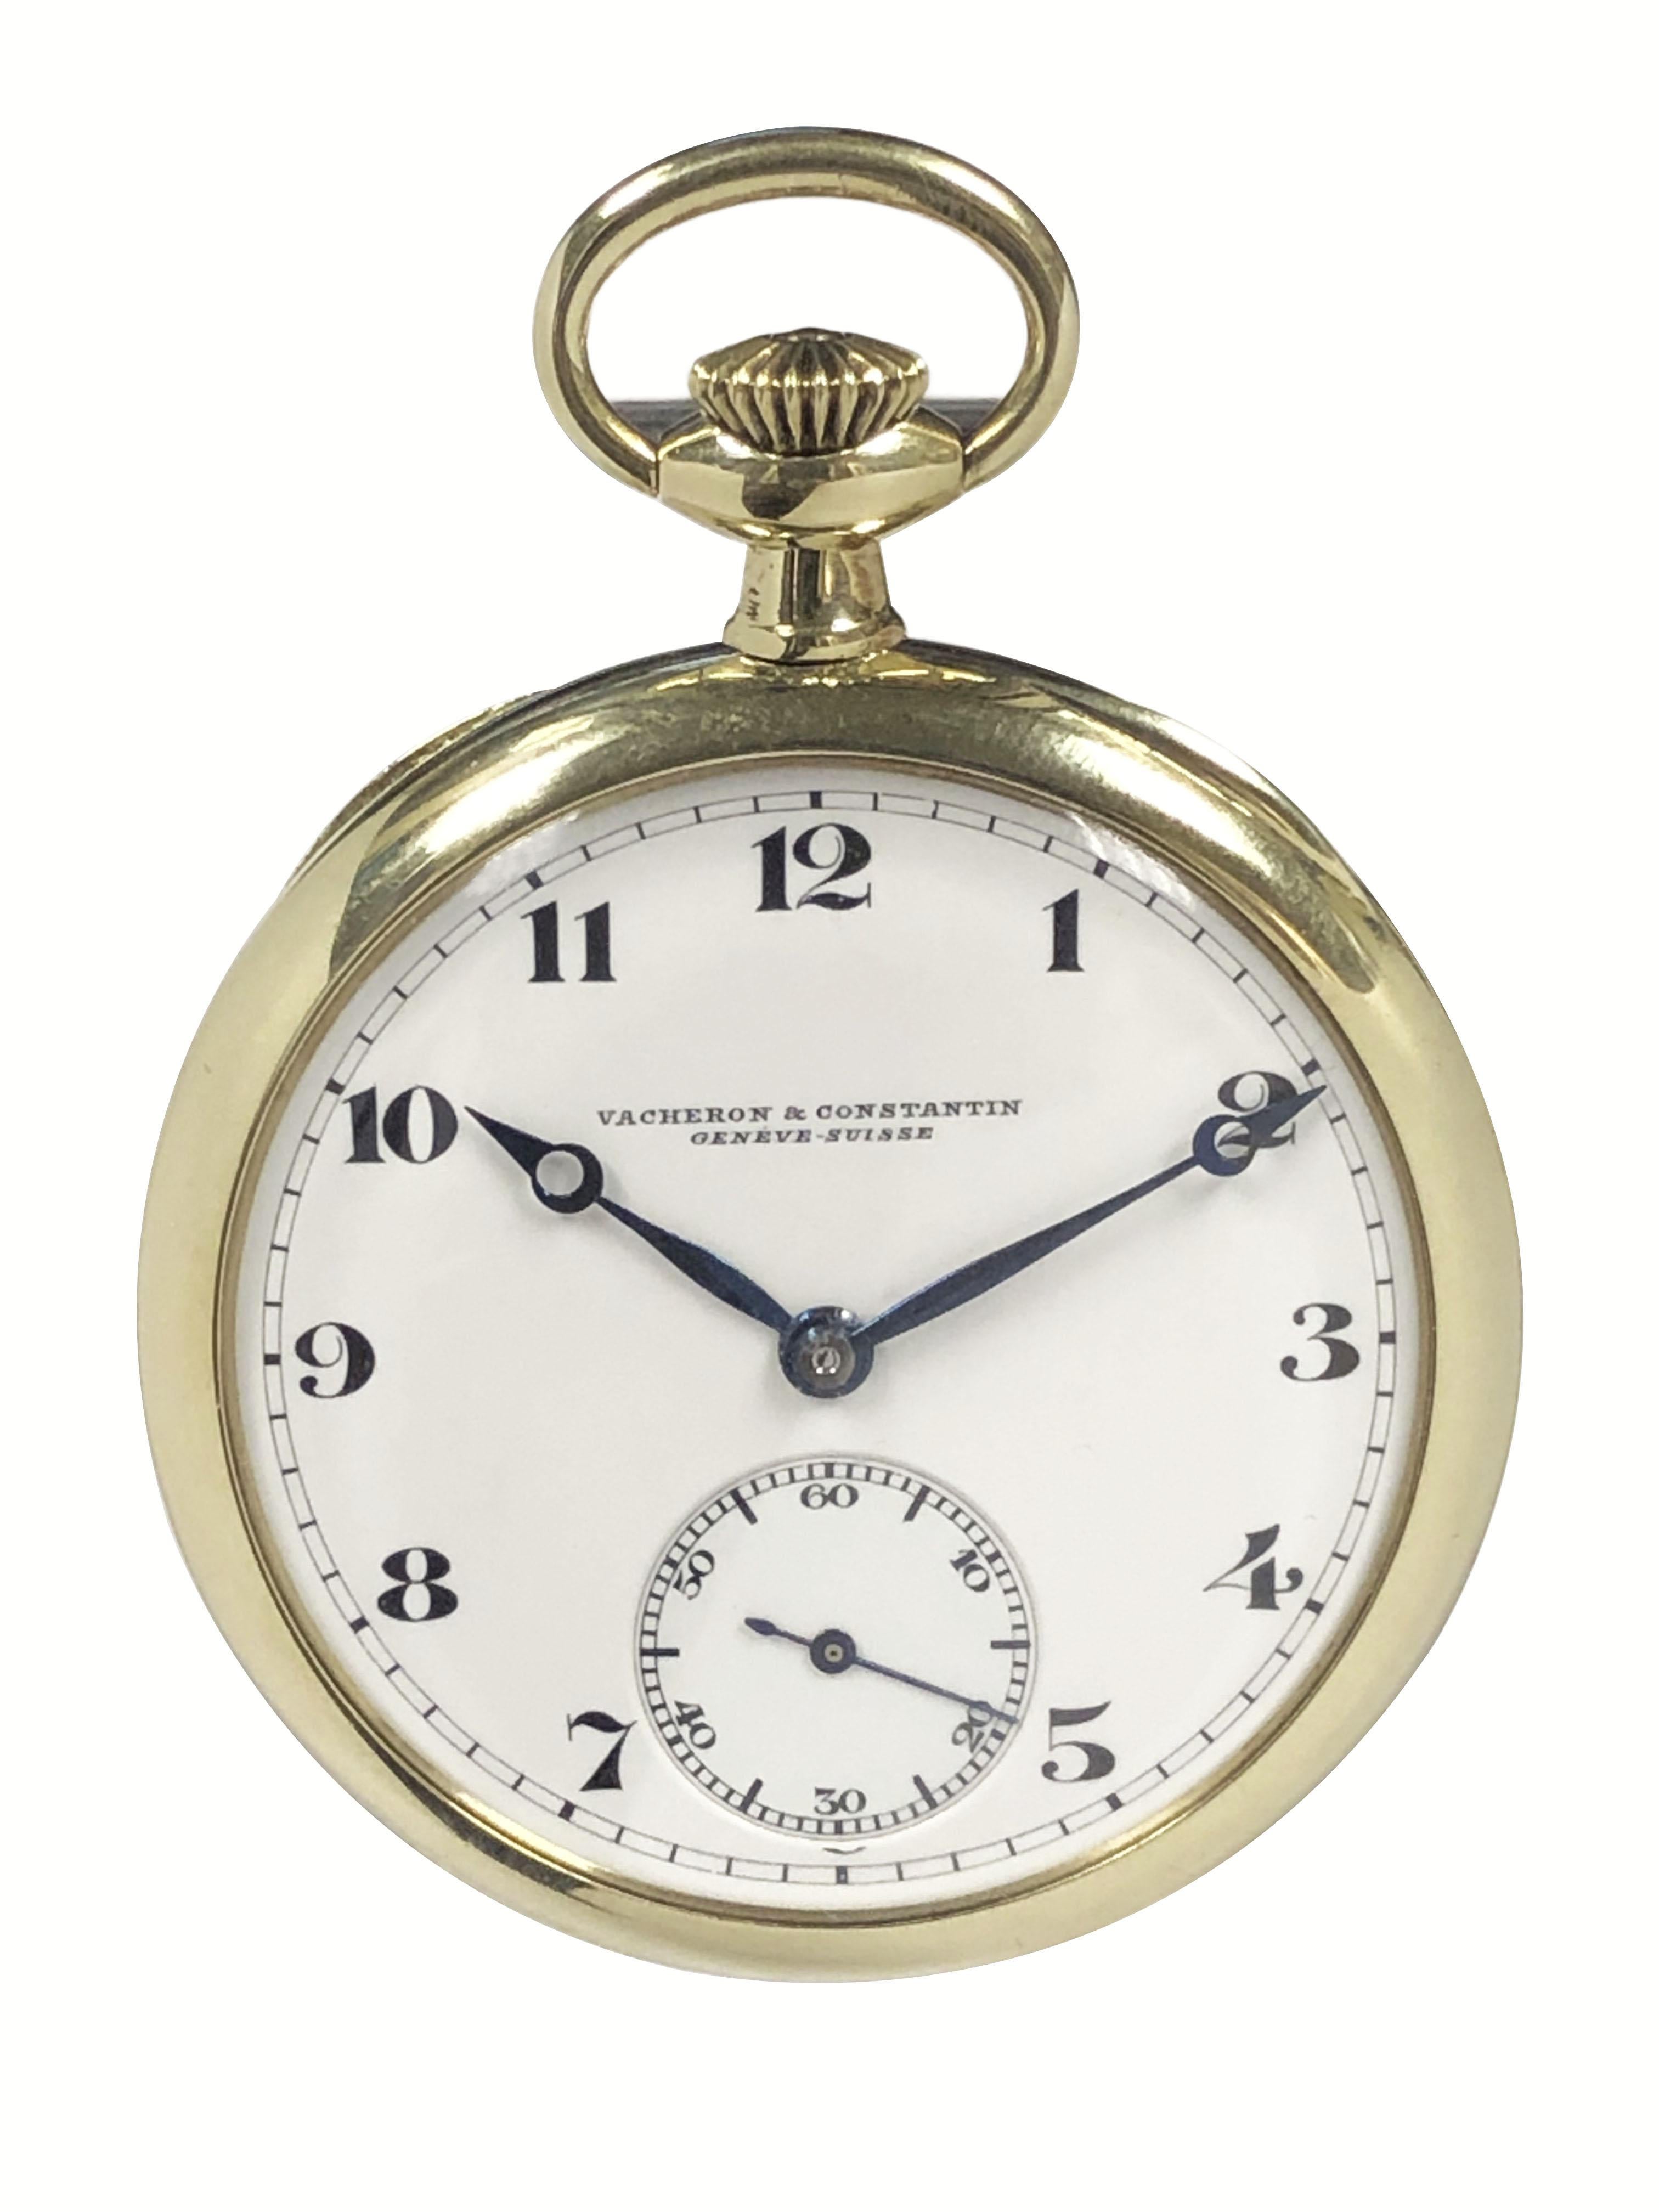 Circa 1920s Vacheron & Constantin Pocket watch, 44 M.M. 14k Yellow Gold 3 Piece case with inside Dust cover, the cover has an engraved presentation dated 1920. 17 Jewel Gilt lever movement, Porcelain Dial with sunk seconds chapter. Recently serviced